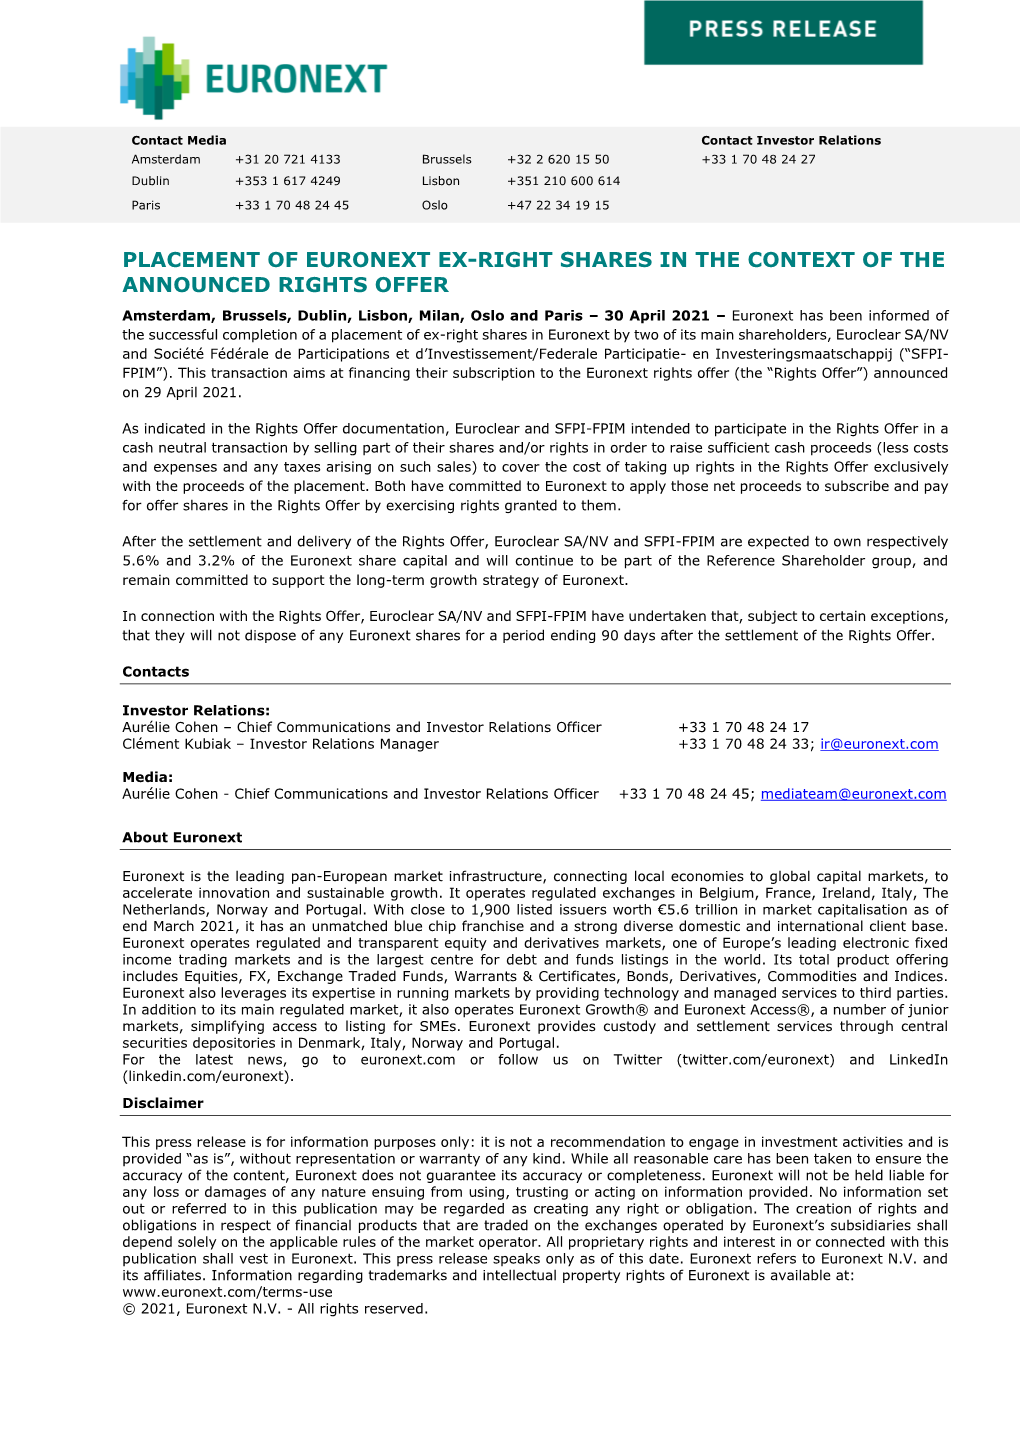 Placement of Euronext Ex-Right Shares in The